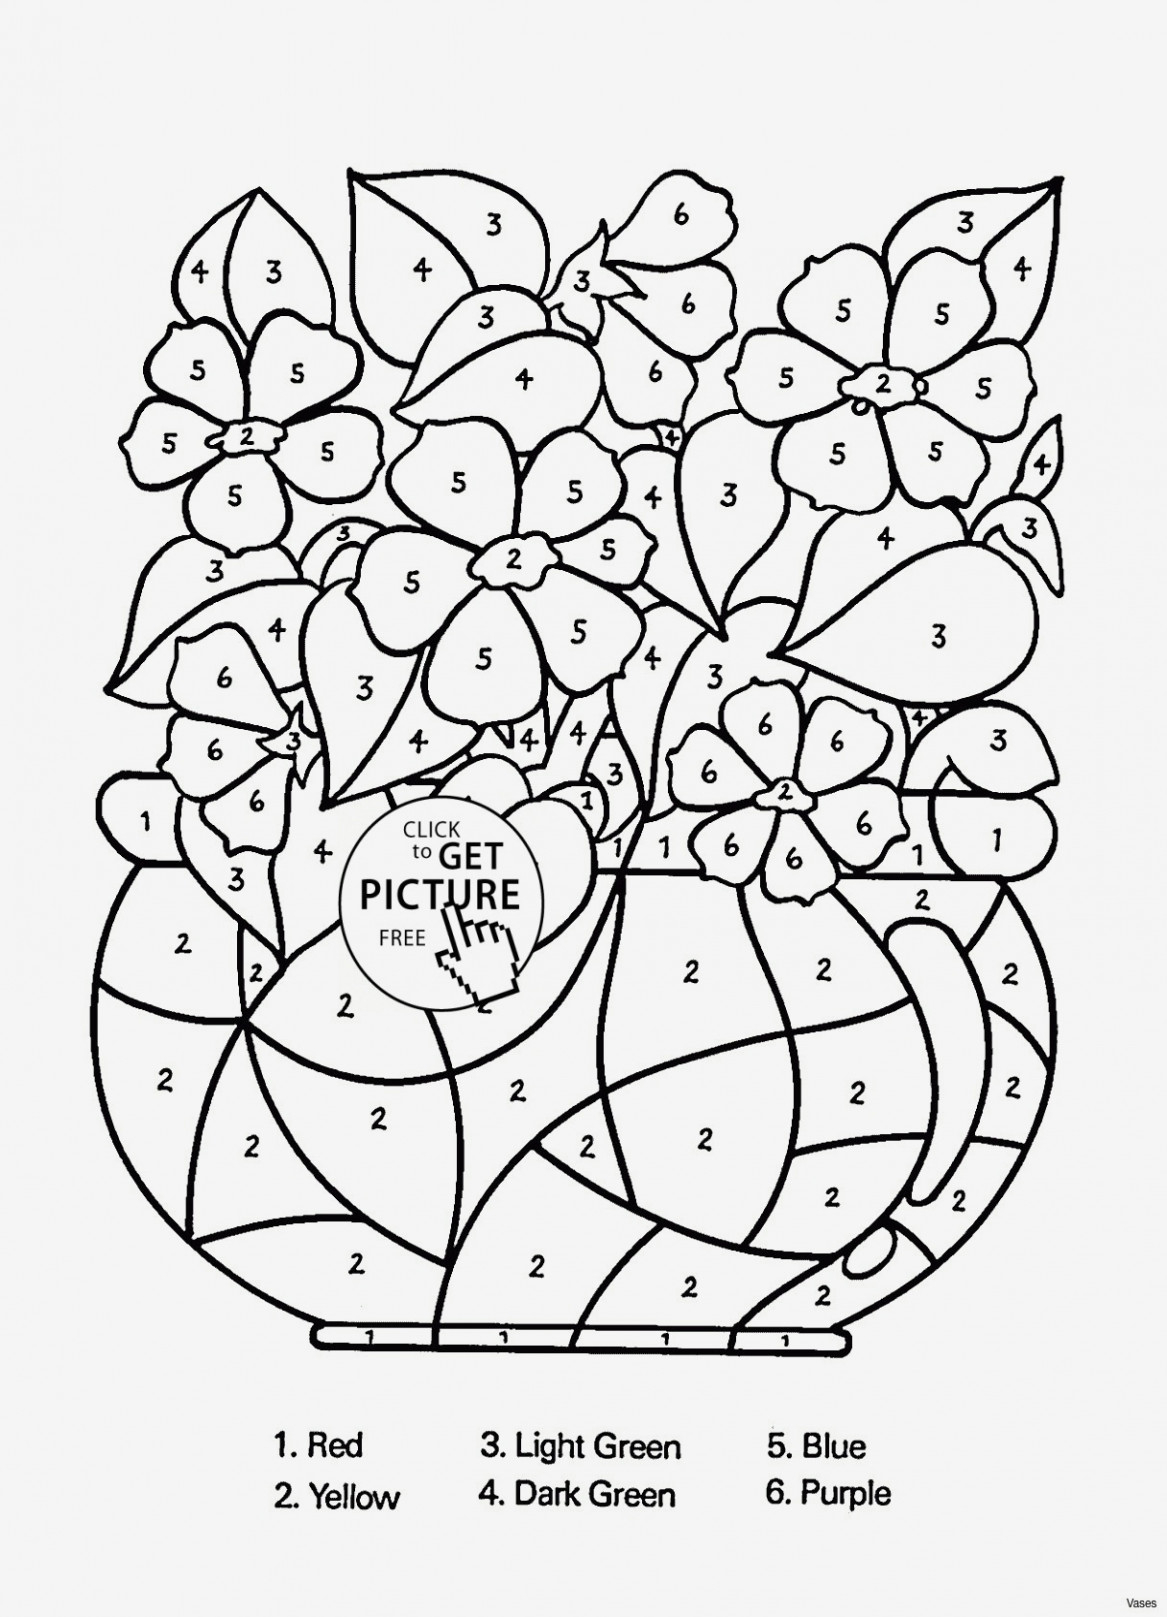 Free Custom Coloring Pages Princesses Coloring Pages Wwwallanlichtman